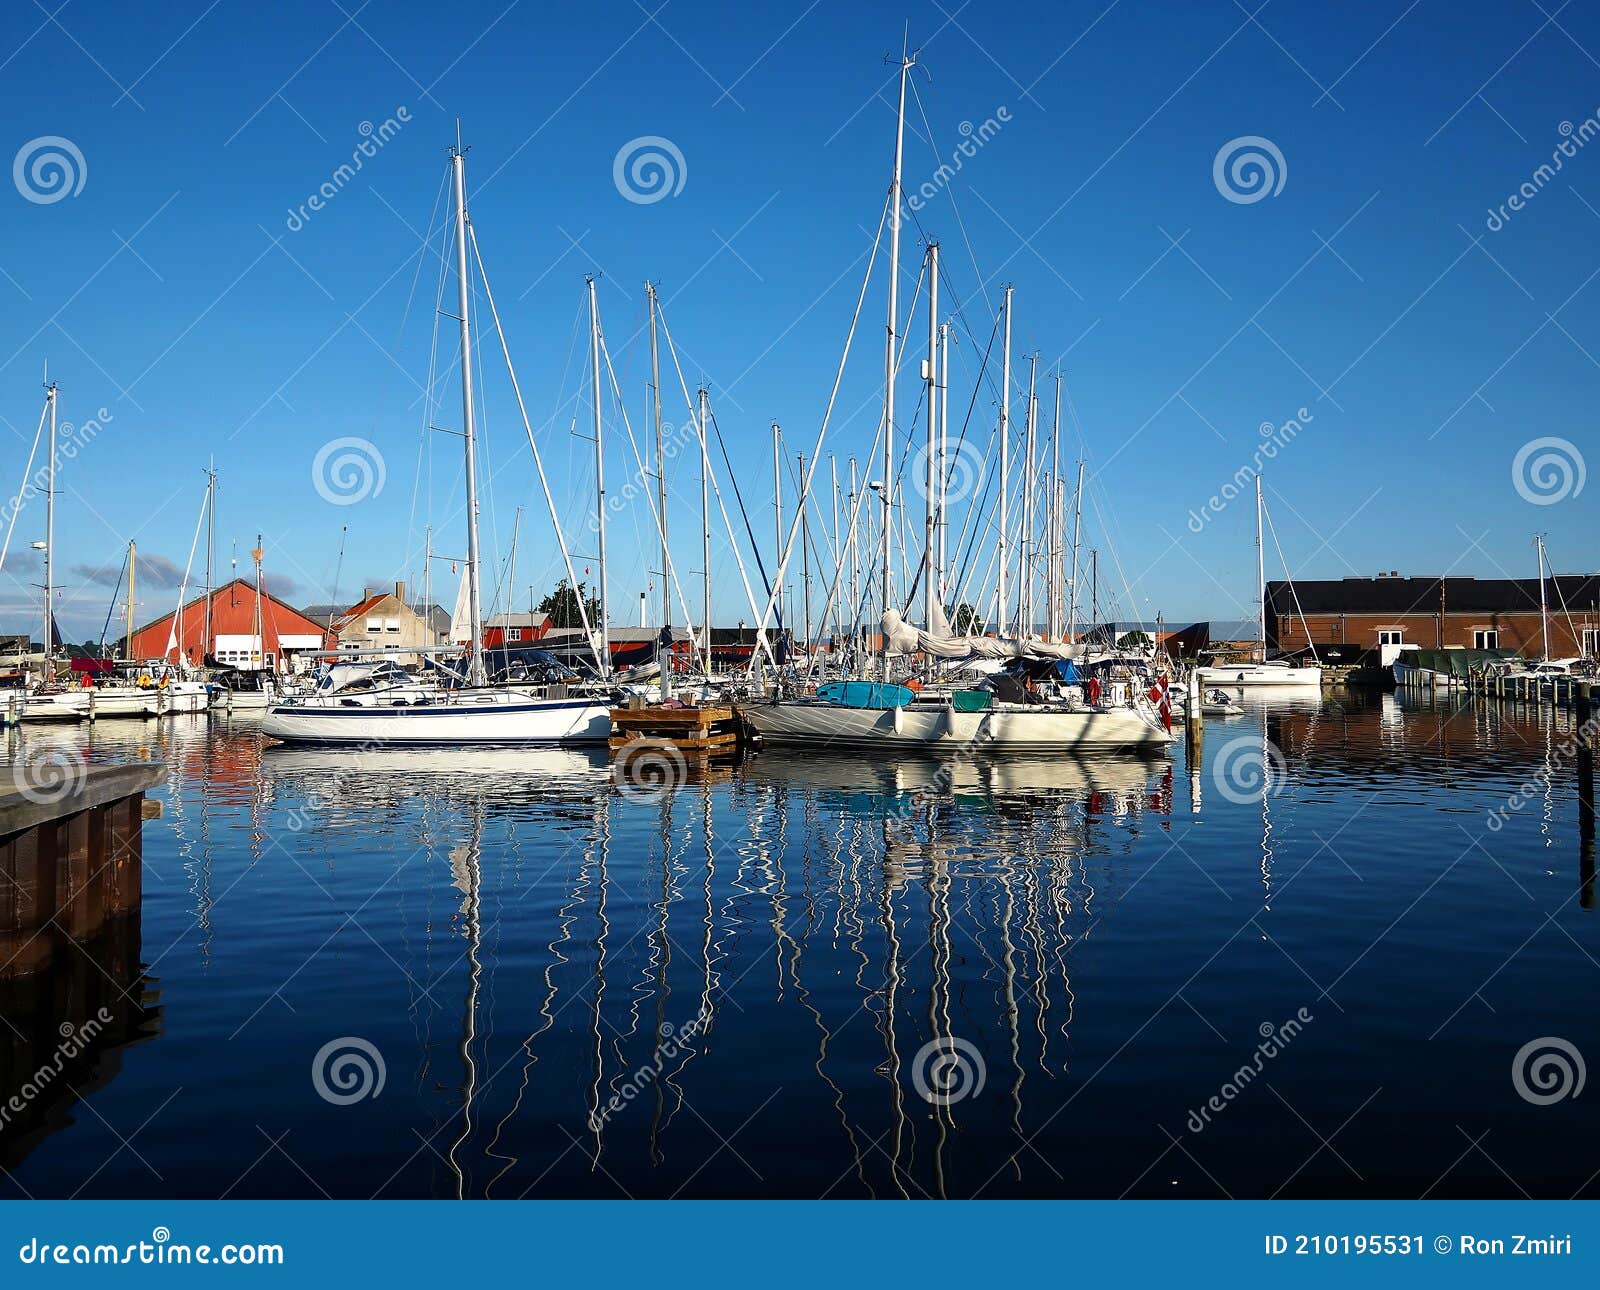 the marina and harbour in faaborg, funen, denmark